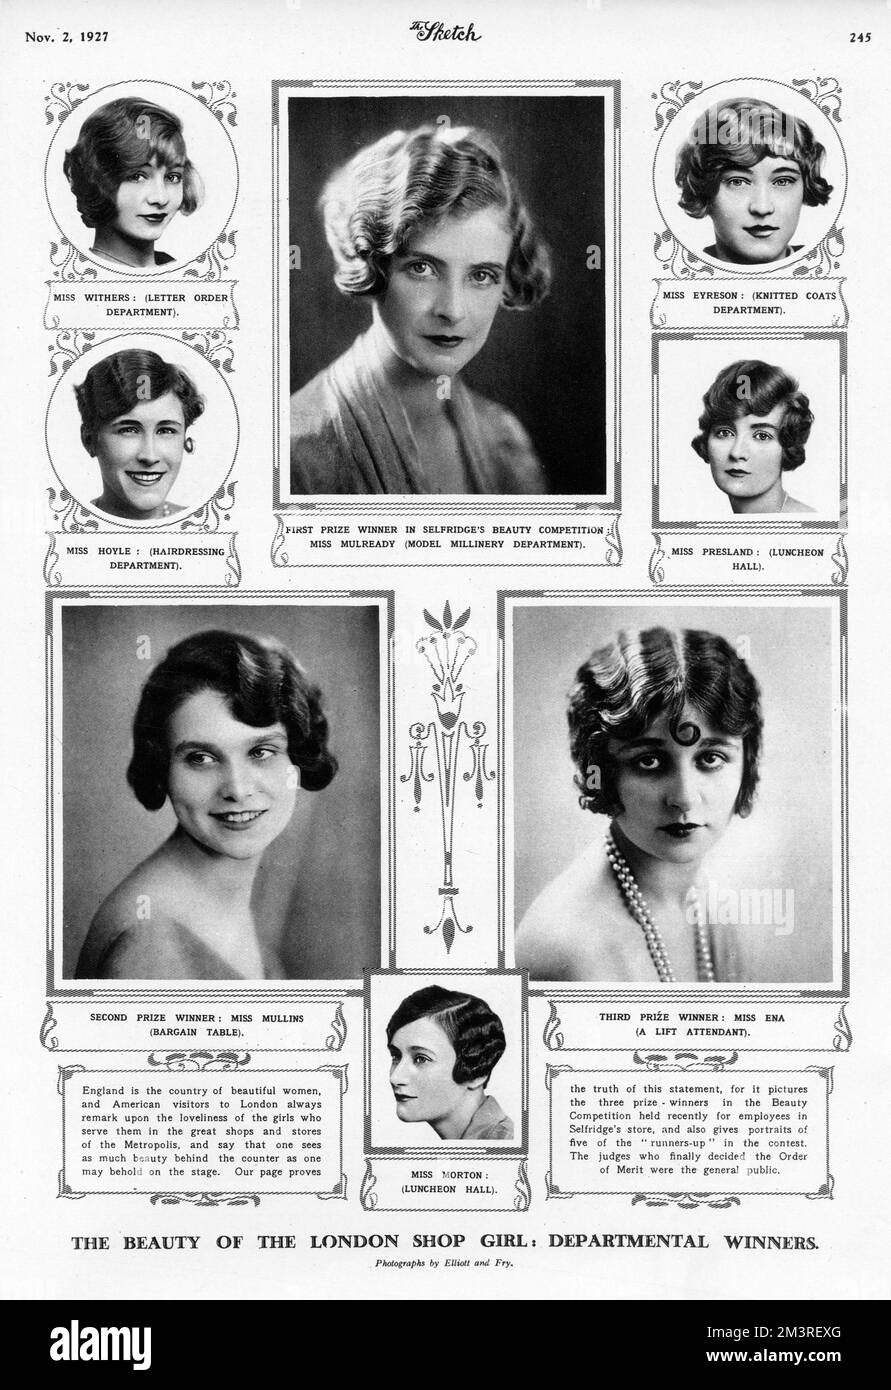 Winners and runner-ups in a beauty competition held for the employees of Selfridges department store.  First prize awarded to Miss Mulready from the model millinery department.     Date: 1927 Stock Photo